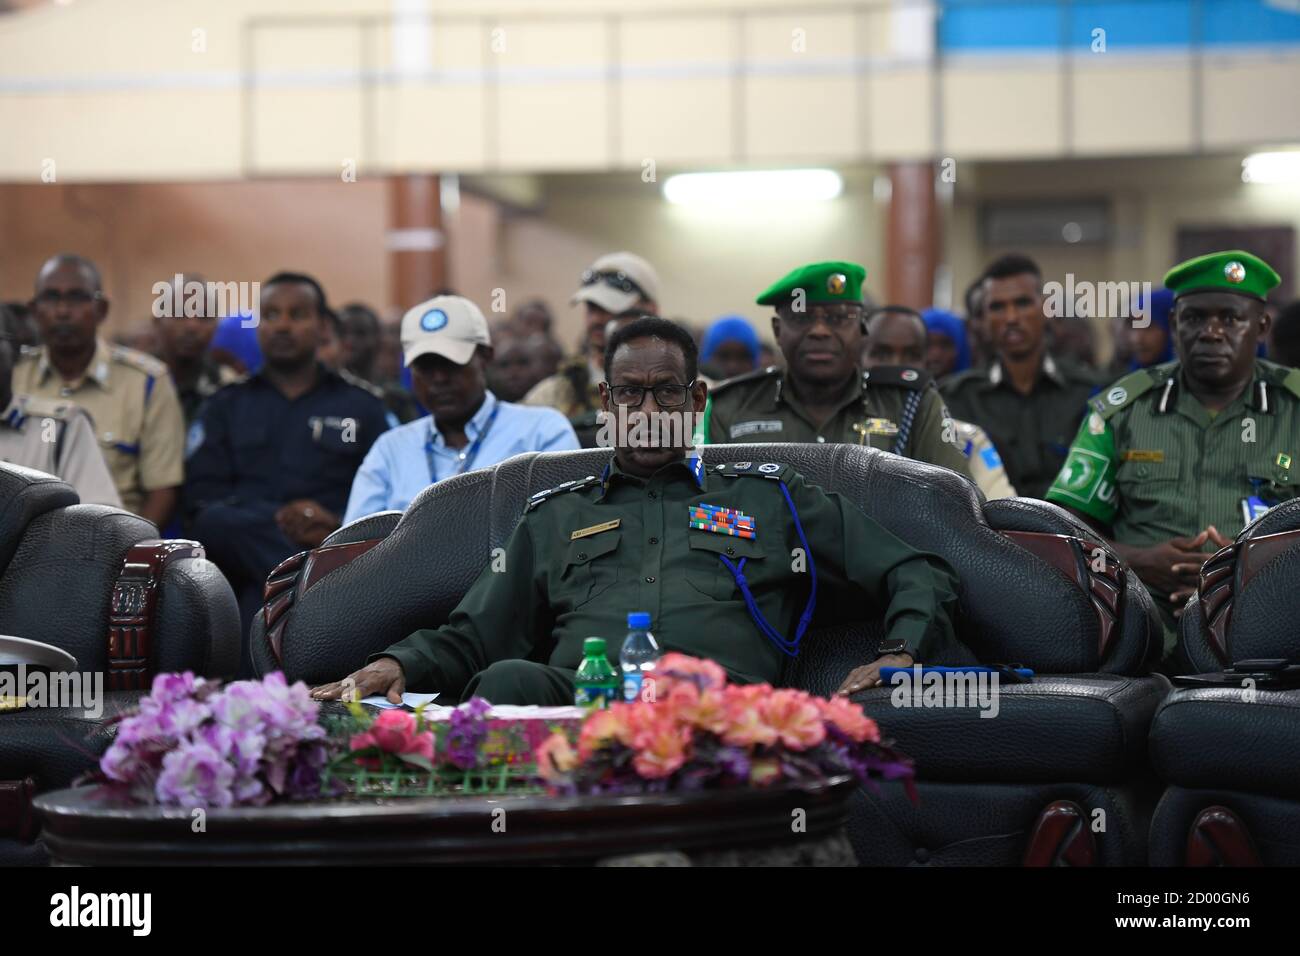 Somalia Police Commissioner Maj. Gen. Abdi Hassan Mohamed attends a pass-out ceremony for Darwish forces at General Kahiye Police Academy in Mogadishu, Somalia on 13 February 2020. Stock Photo